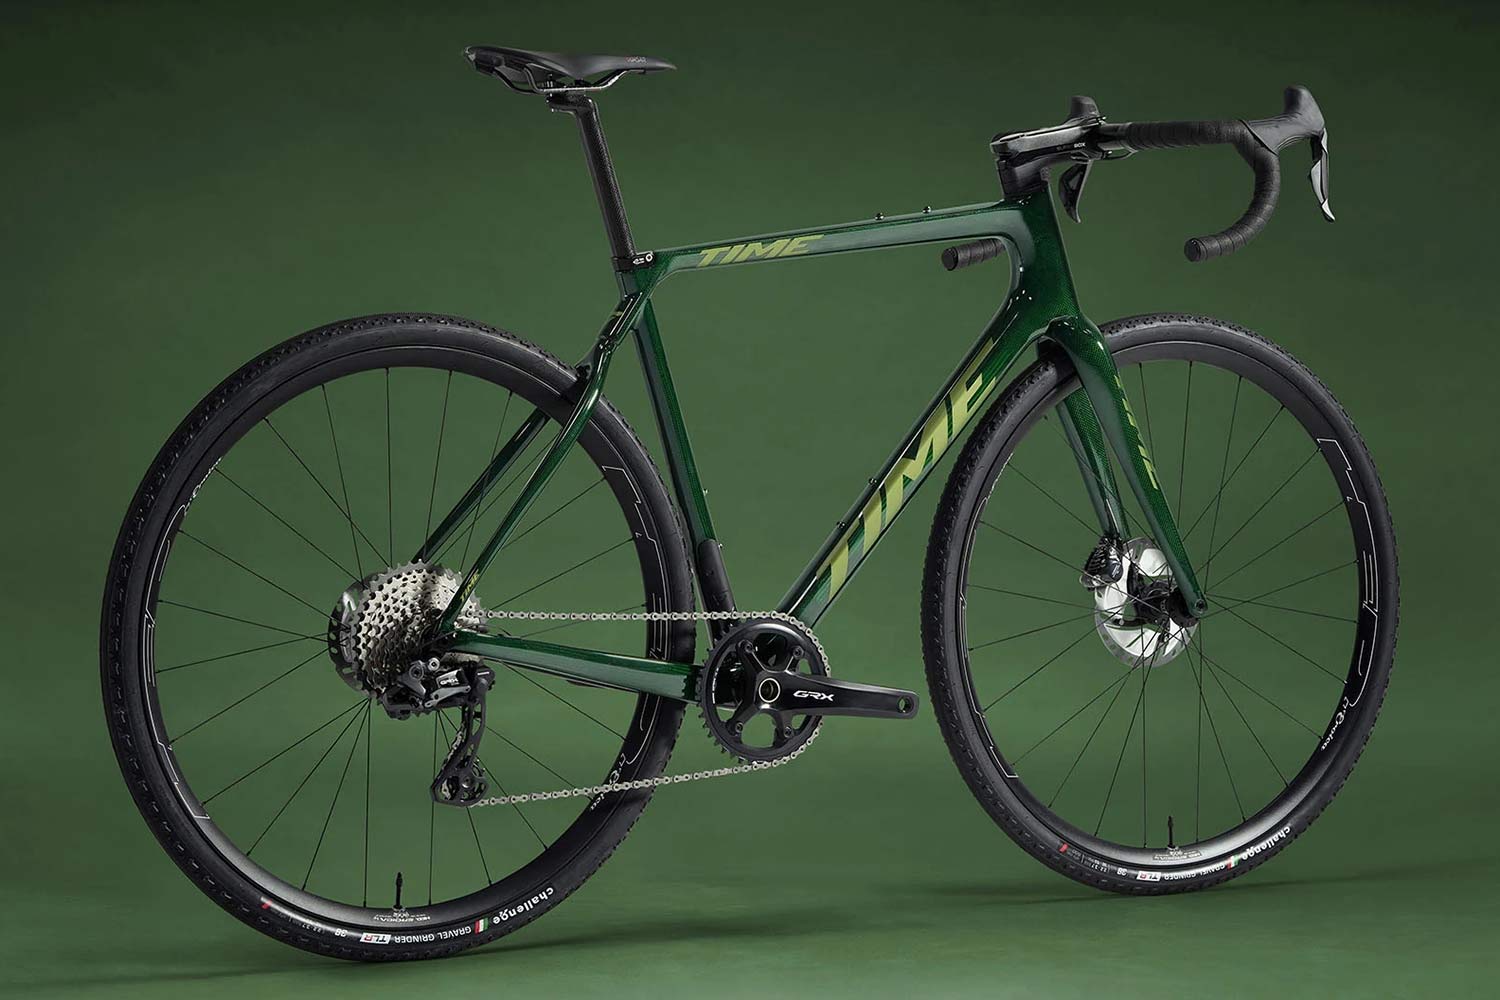 TIME ADHX bio-based-Dyneema carbon all-road gravel bike, angled green complete